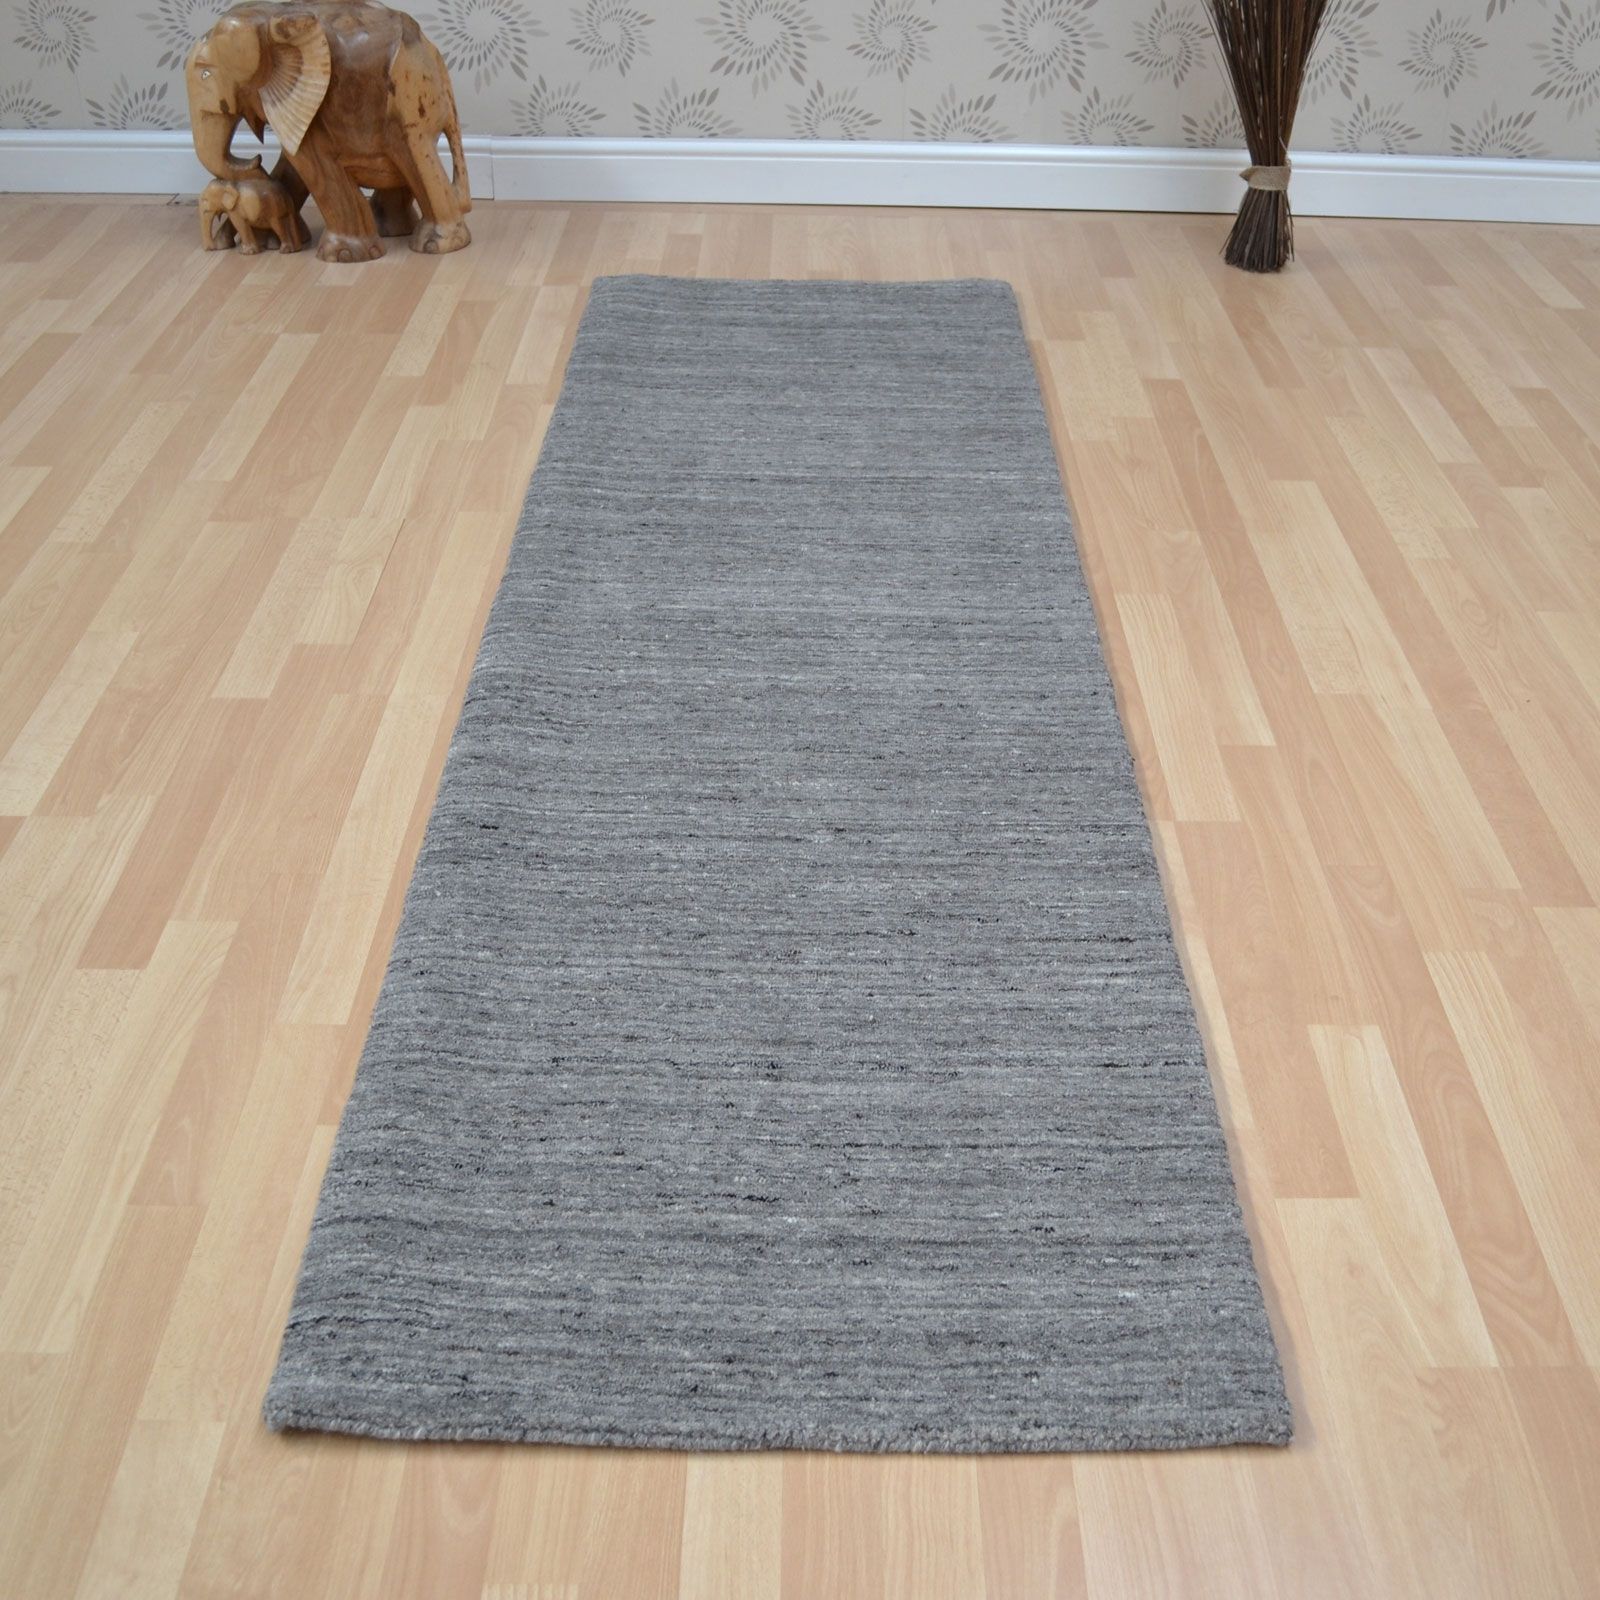 Hallway Runners Find The Best Hall Rug For Your Home Pertaining To Hallway Runners By The Metre (View 8 of 20)